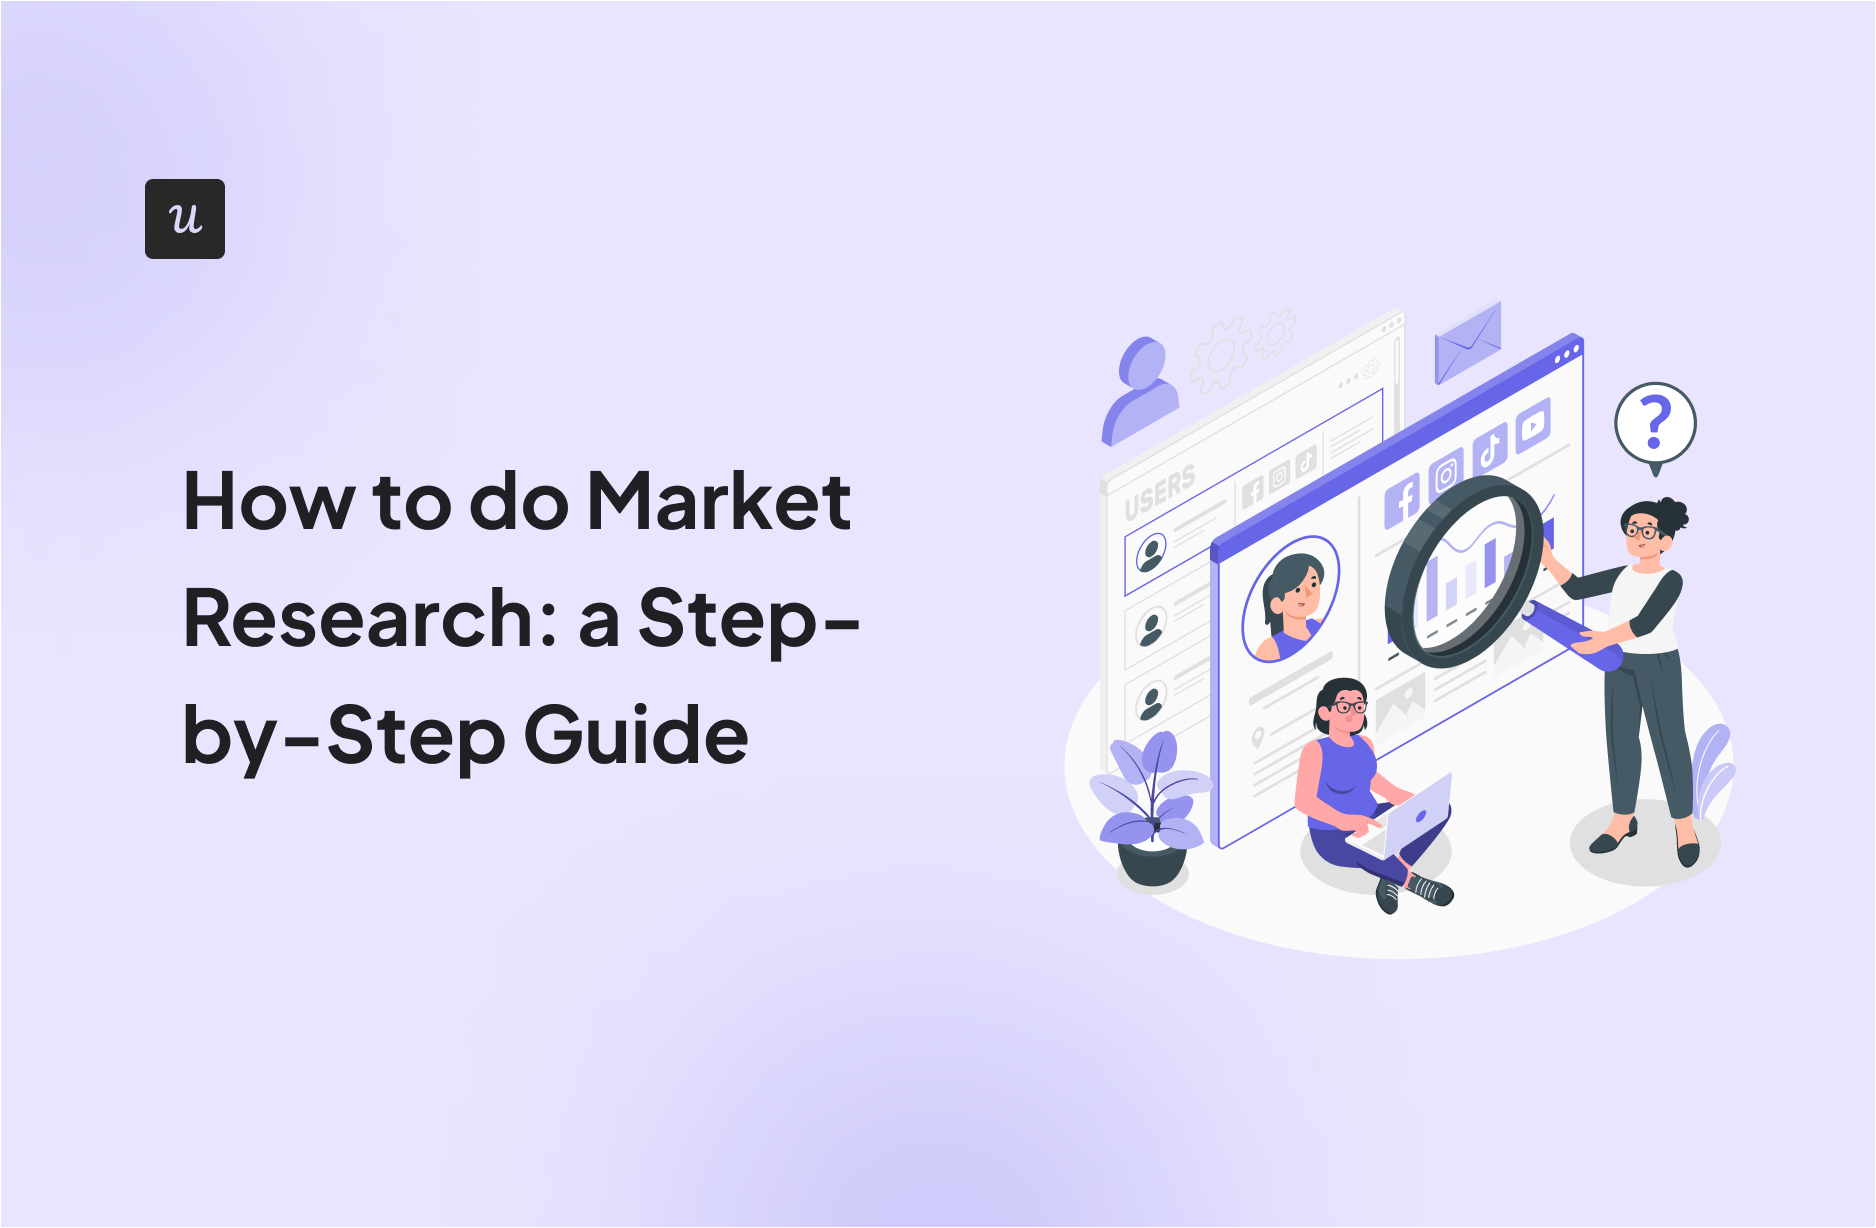 How to do Market Research: a Step-by-Step Guide